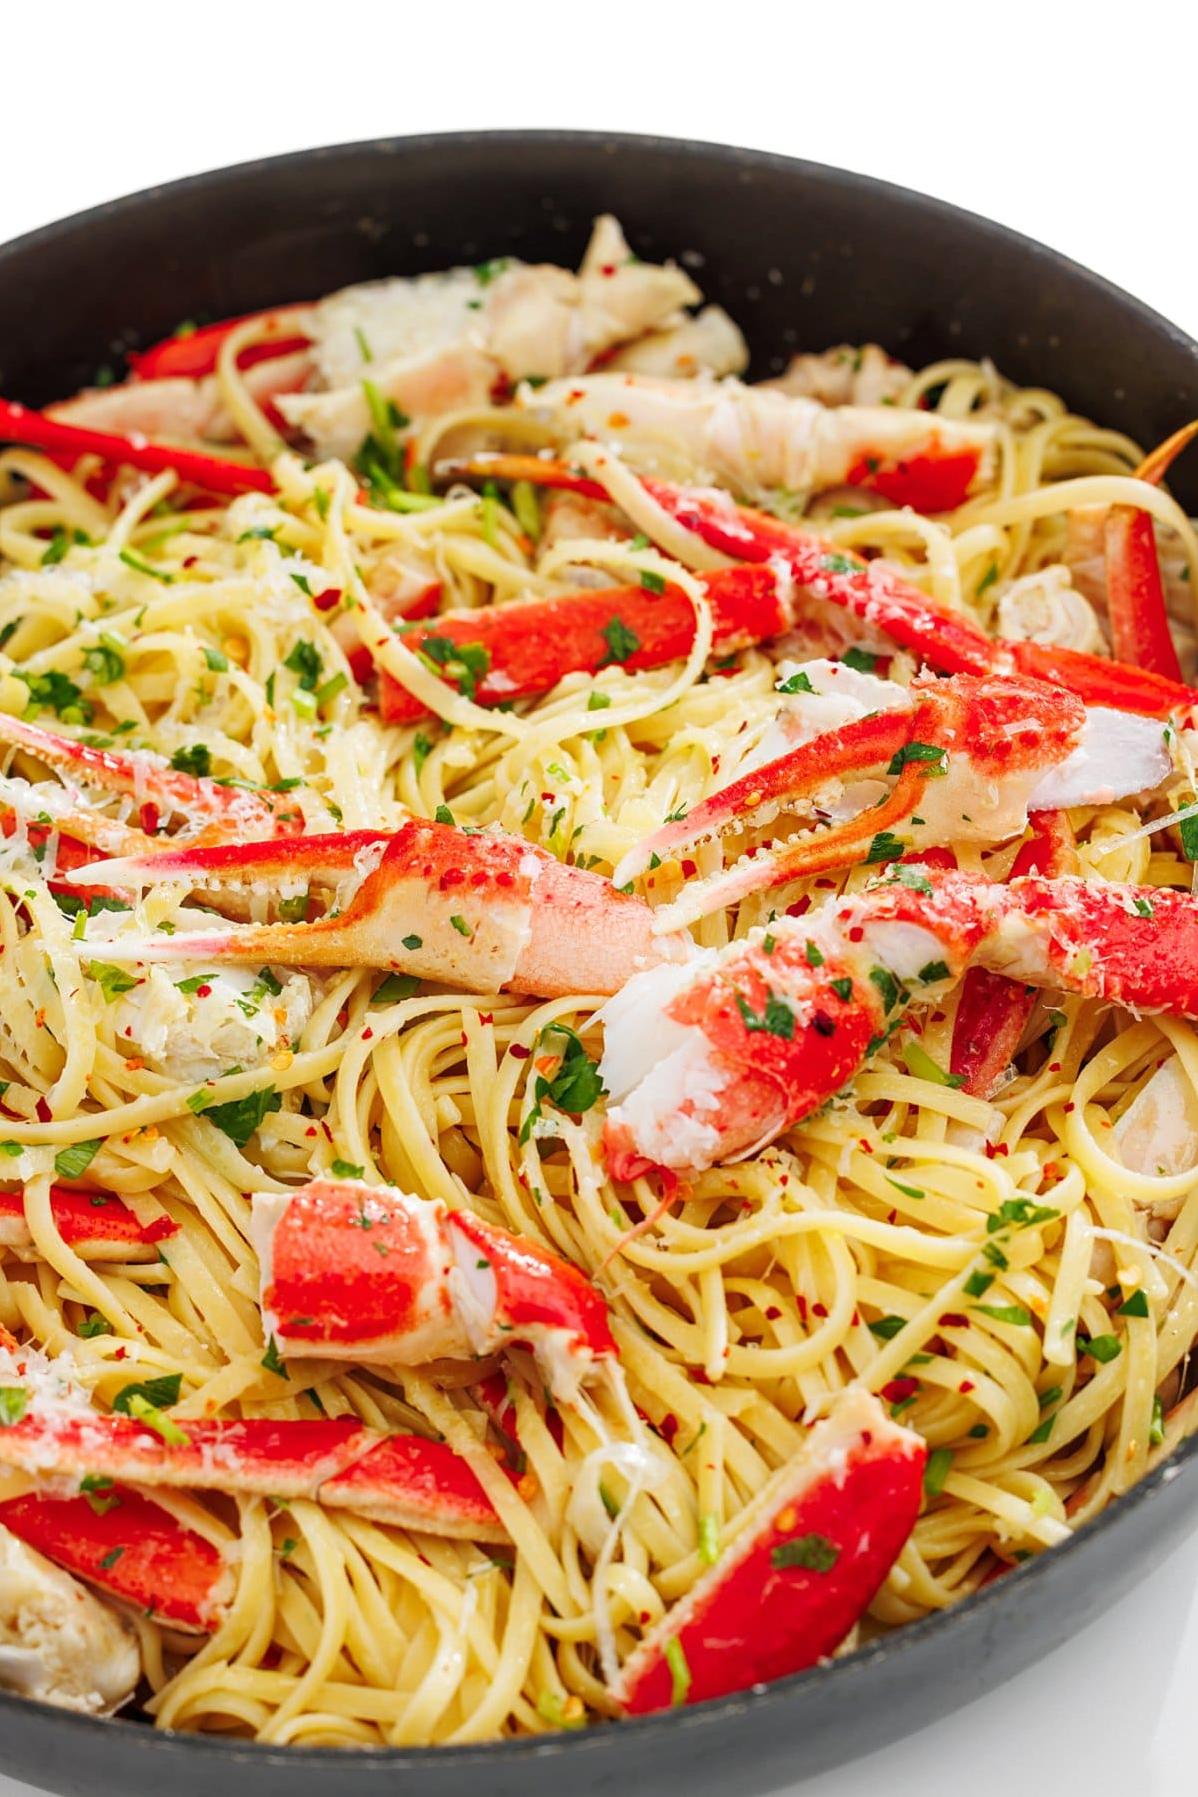  Dive into this decadent dish of wine-soaked crab legs.